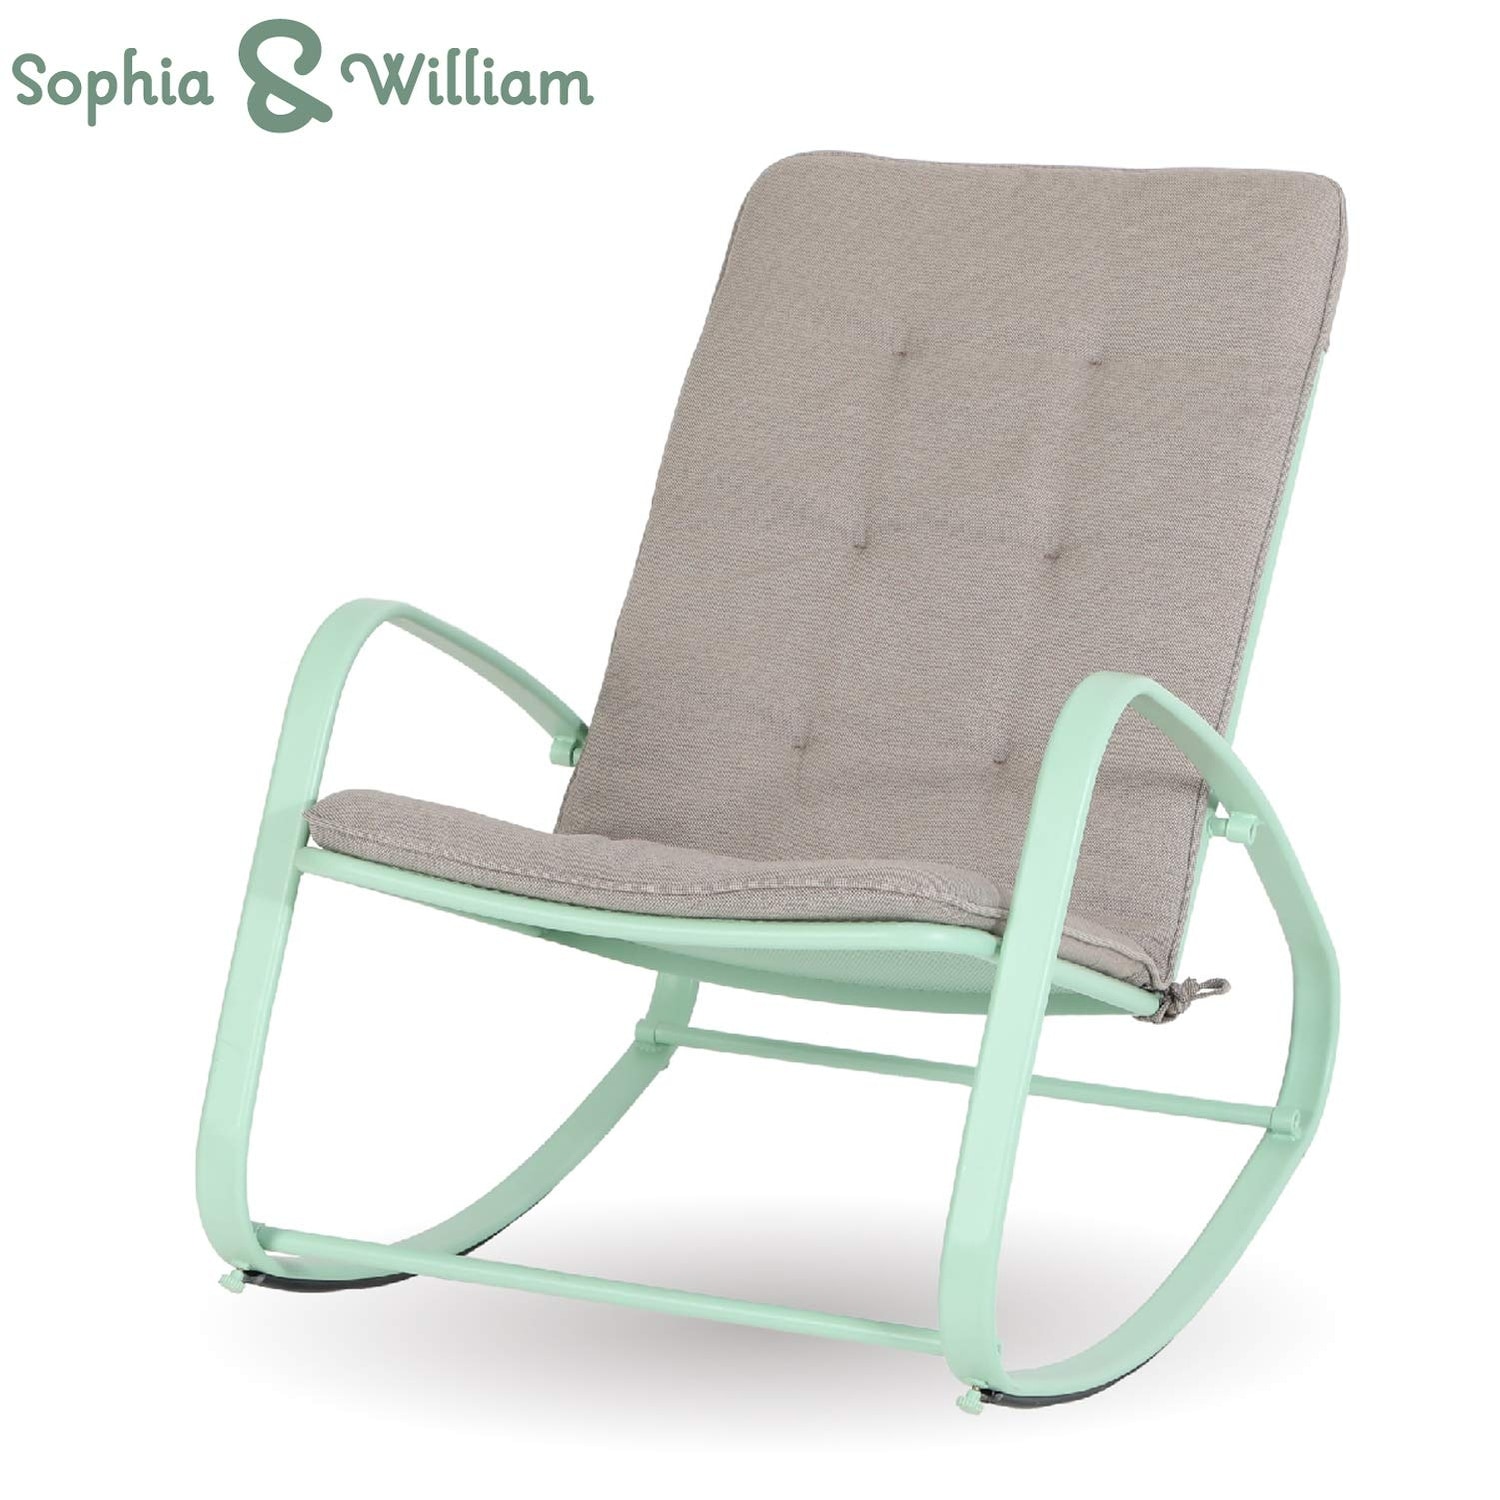 sophia and william outdoor patio rocking chair padded steel rocker chairs  support 300lbs